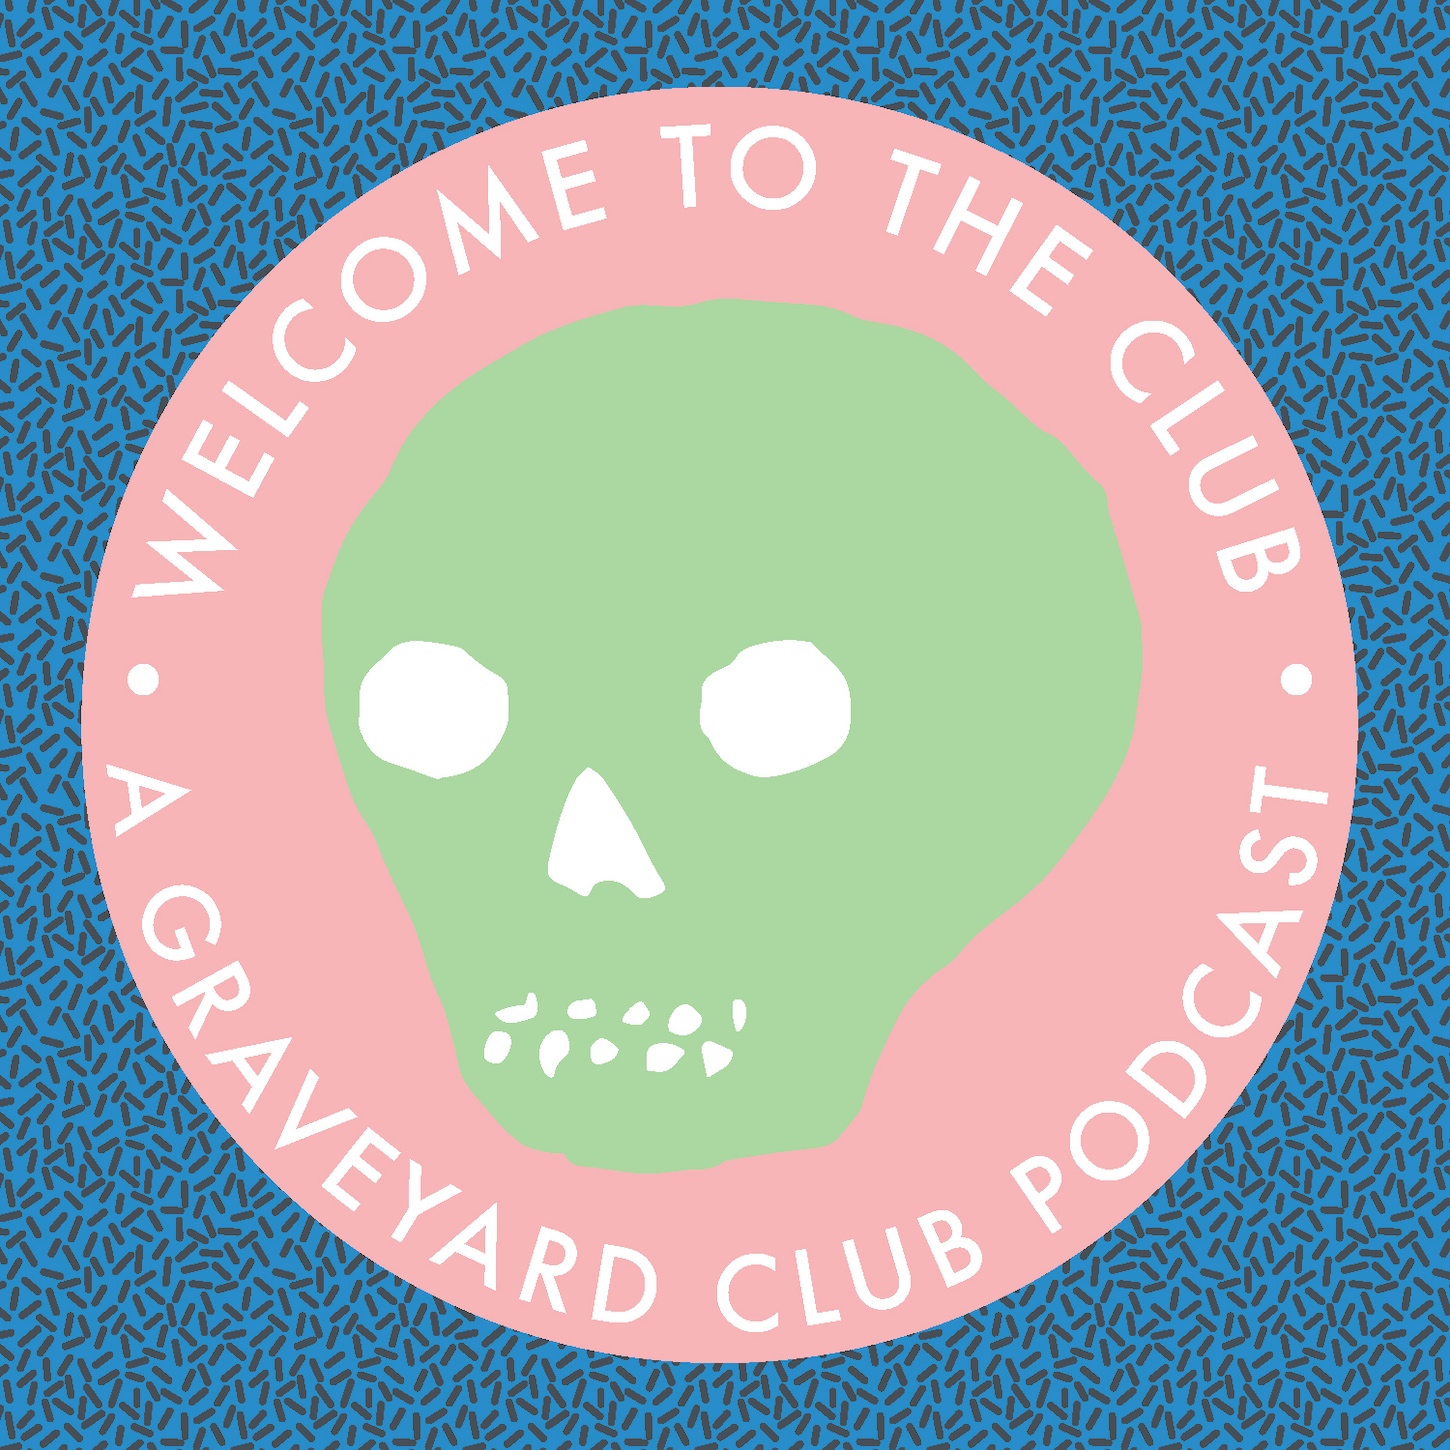 Welcome to the Club: A Graveyard Club Podcast